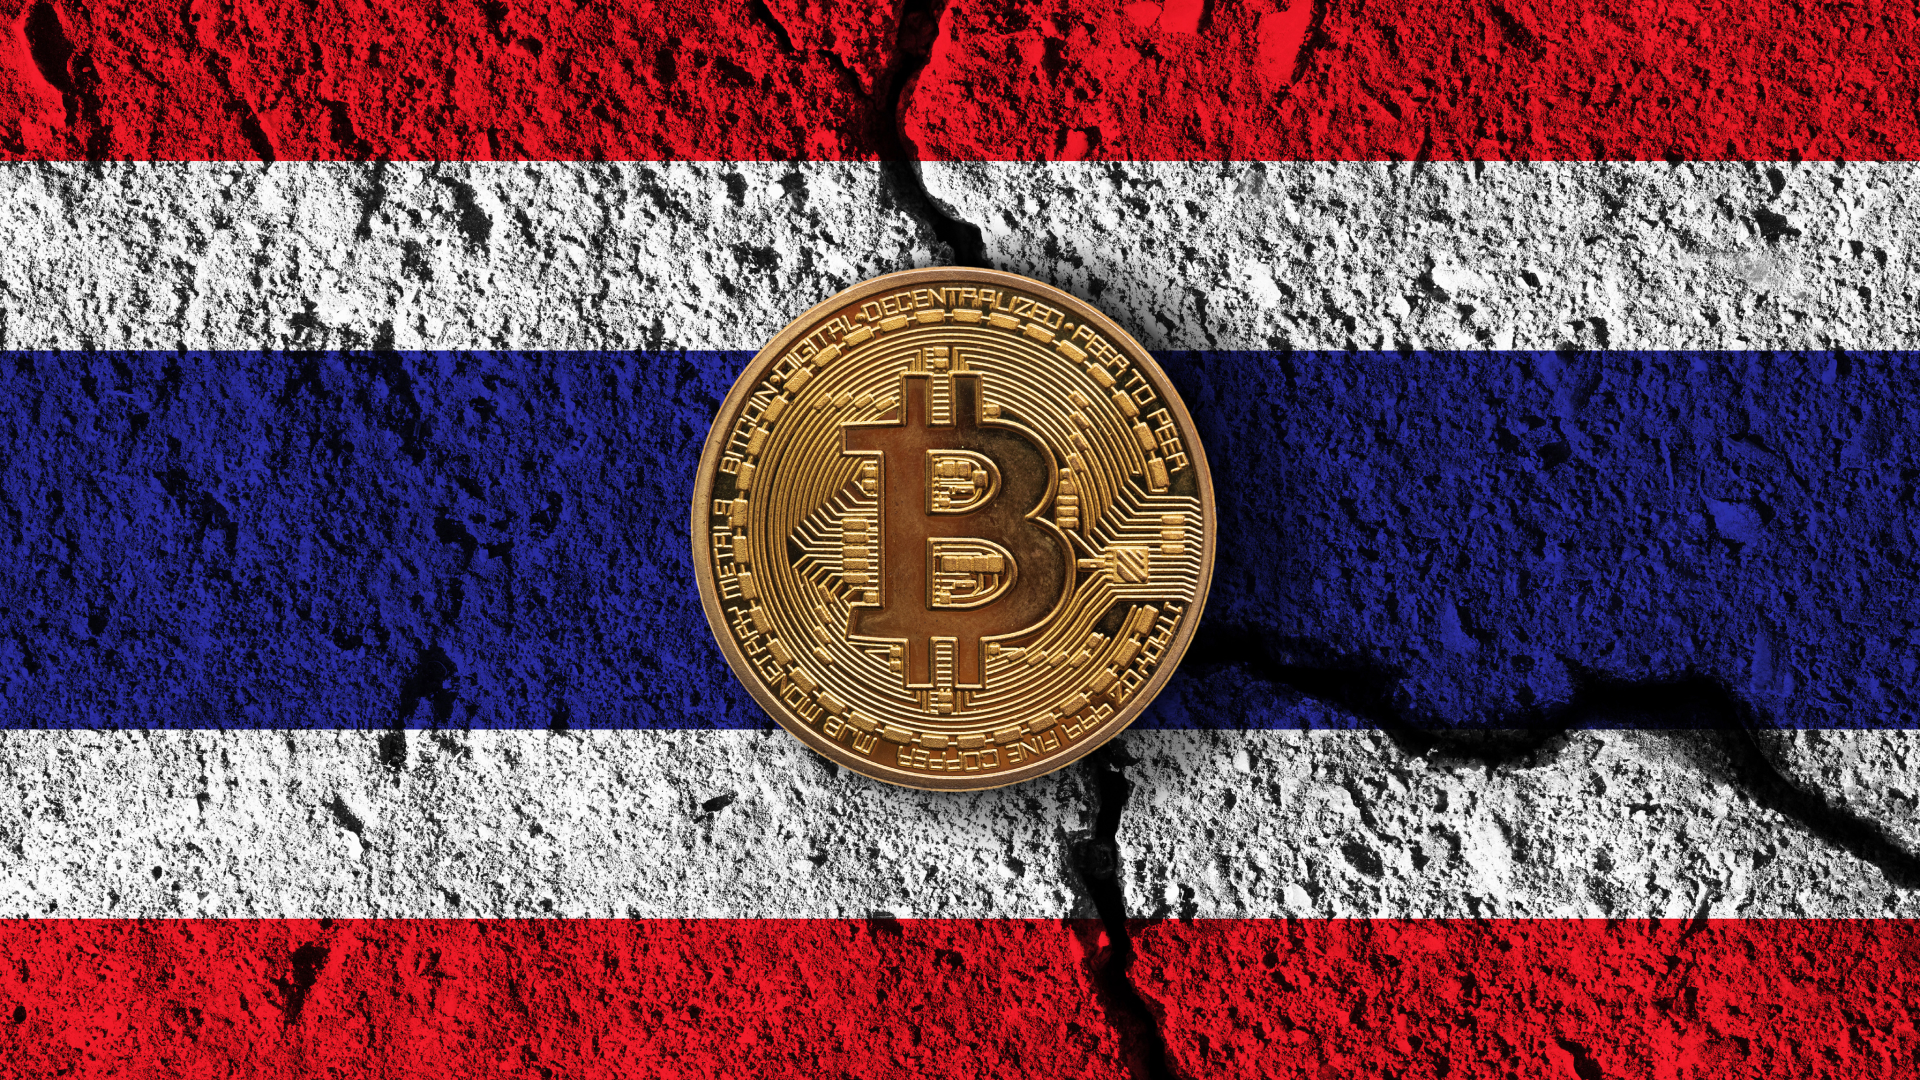 Gulf Binance Secures Regulatory Approval in Thailand